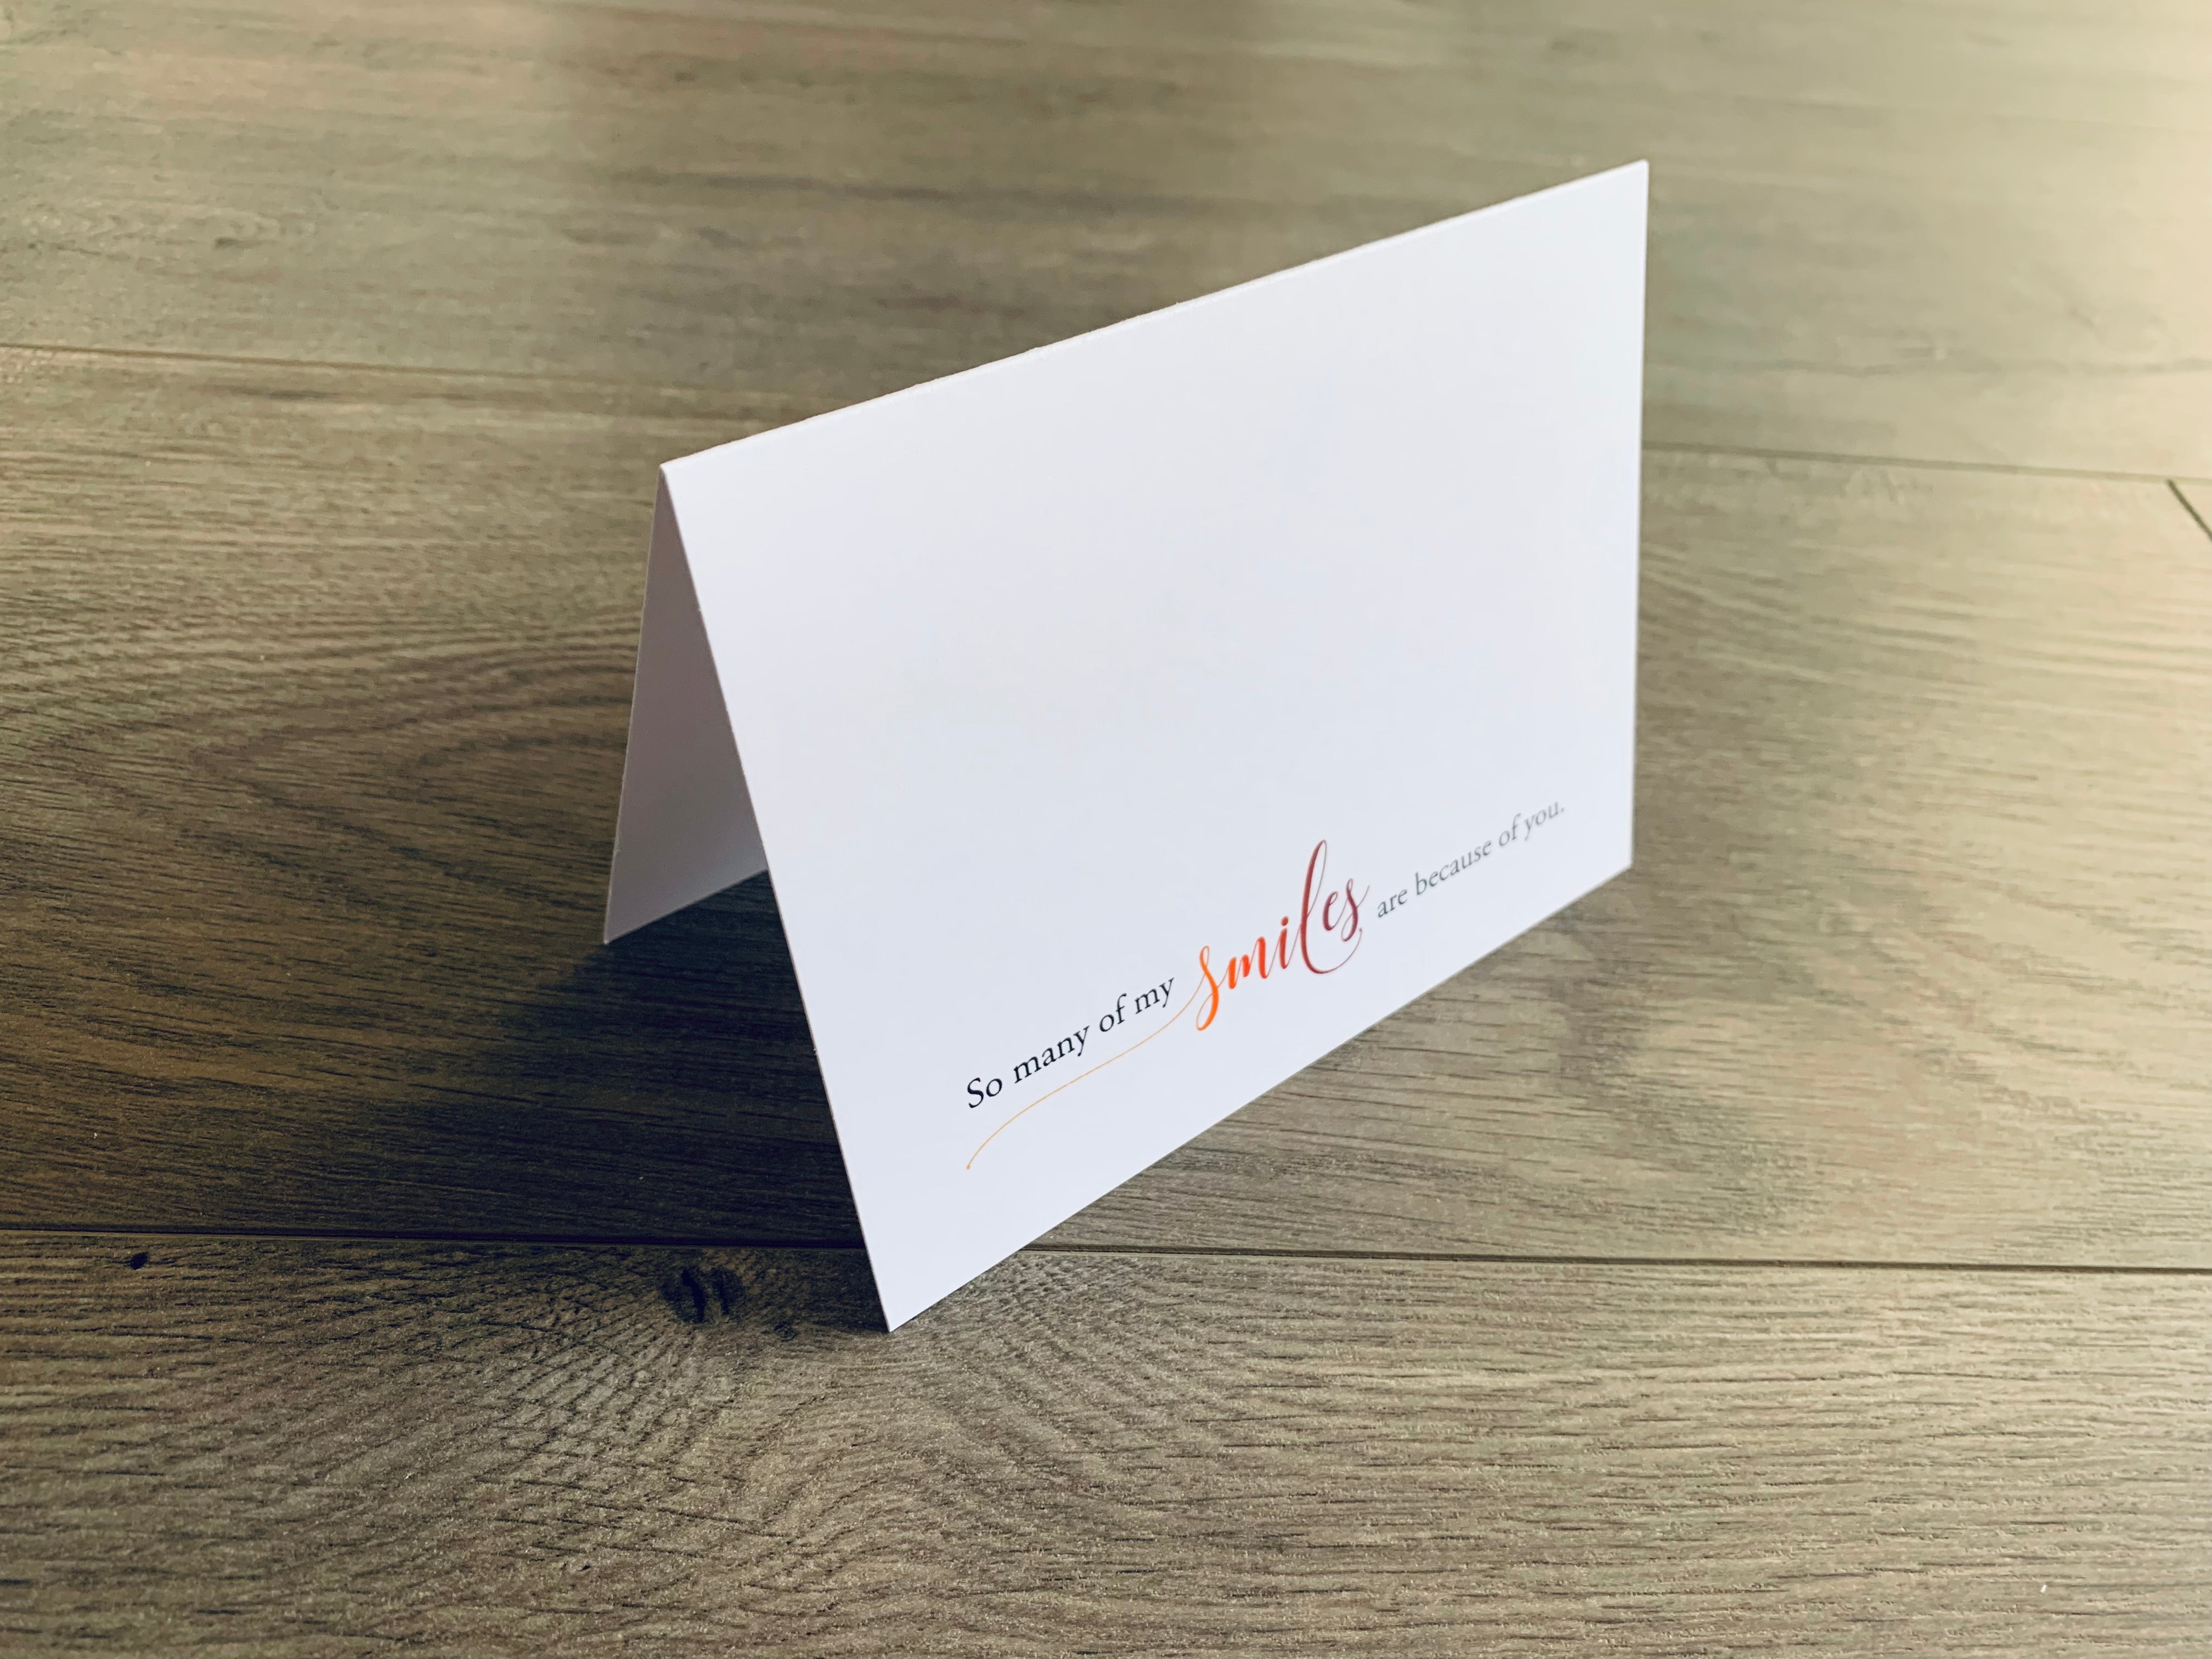 A folded white notecard is propped up on a wooden floor. The card reads, "so many of my smiles are because of you" in a mix of serif and script fonts. Love Collection by Stationare.